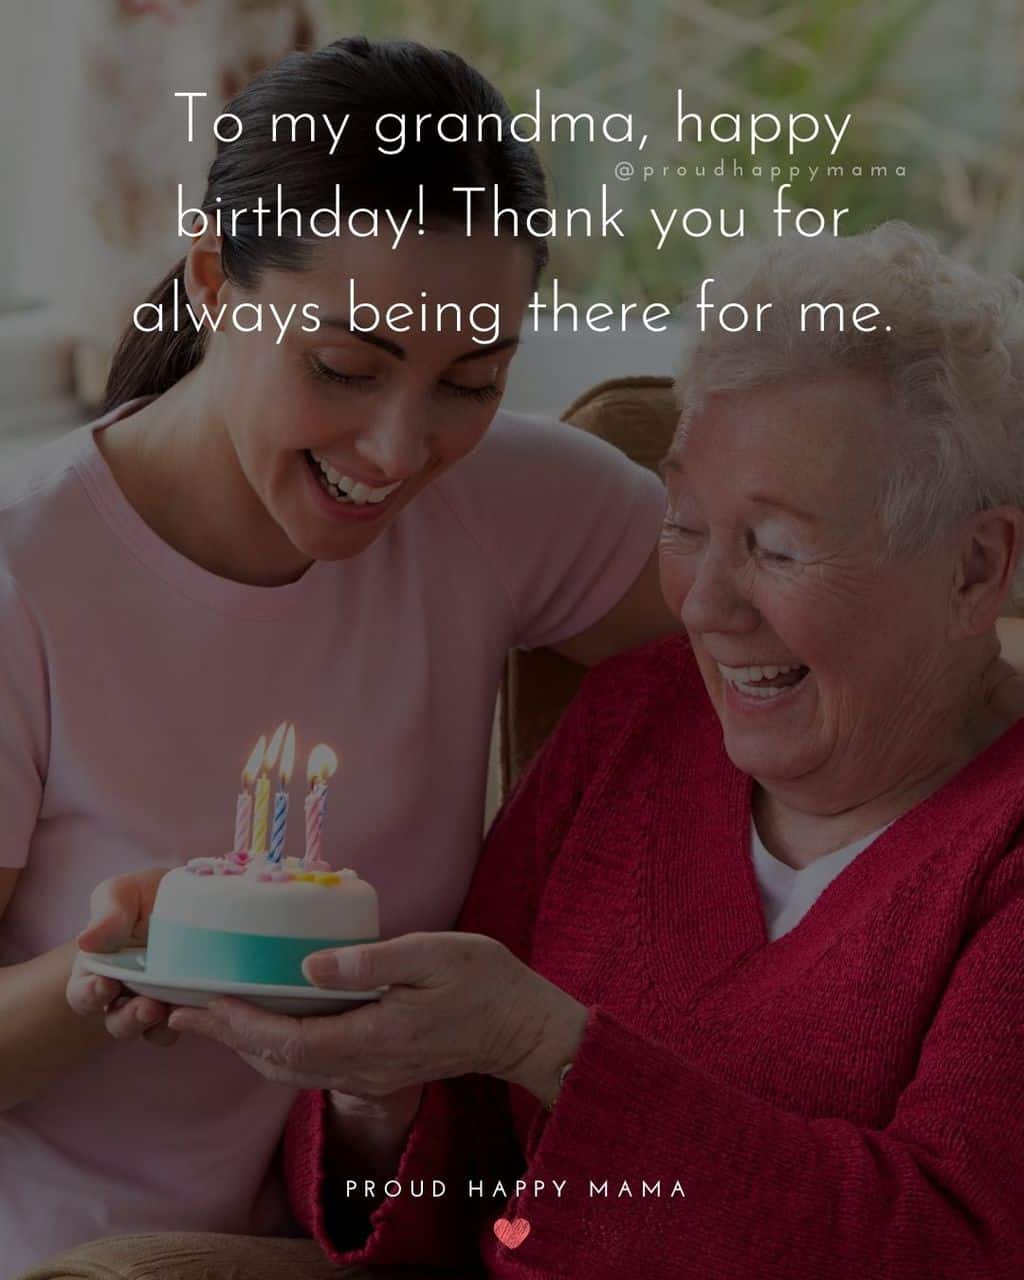 Happy Birthday Grandma Quotes - To my grandma, happy birthday! Thank you for always being there for me.’